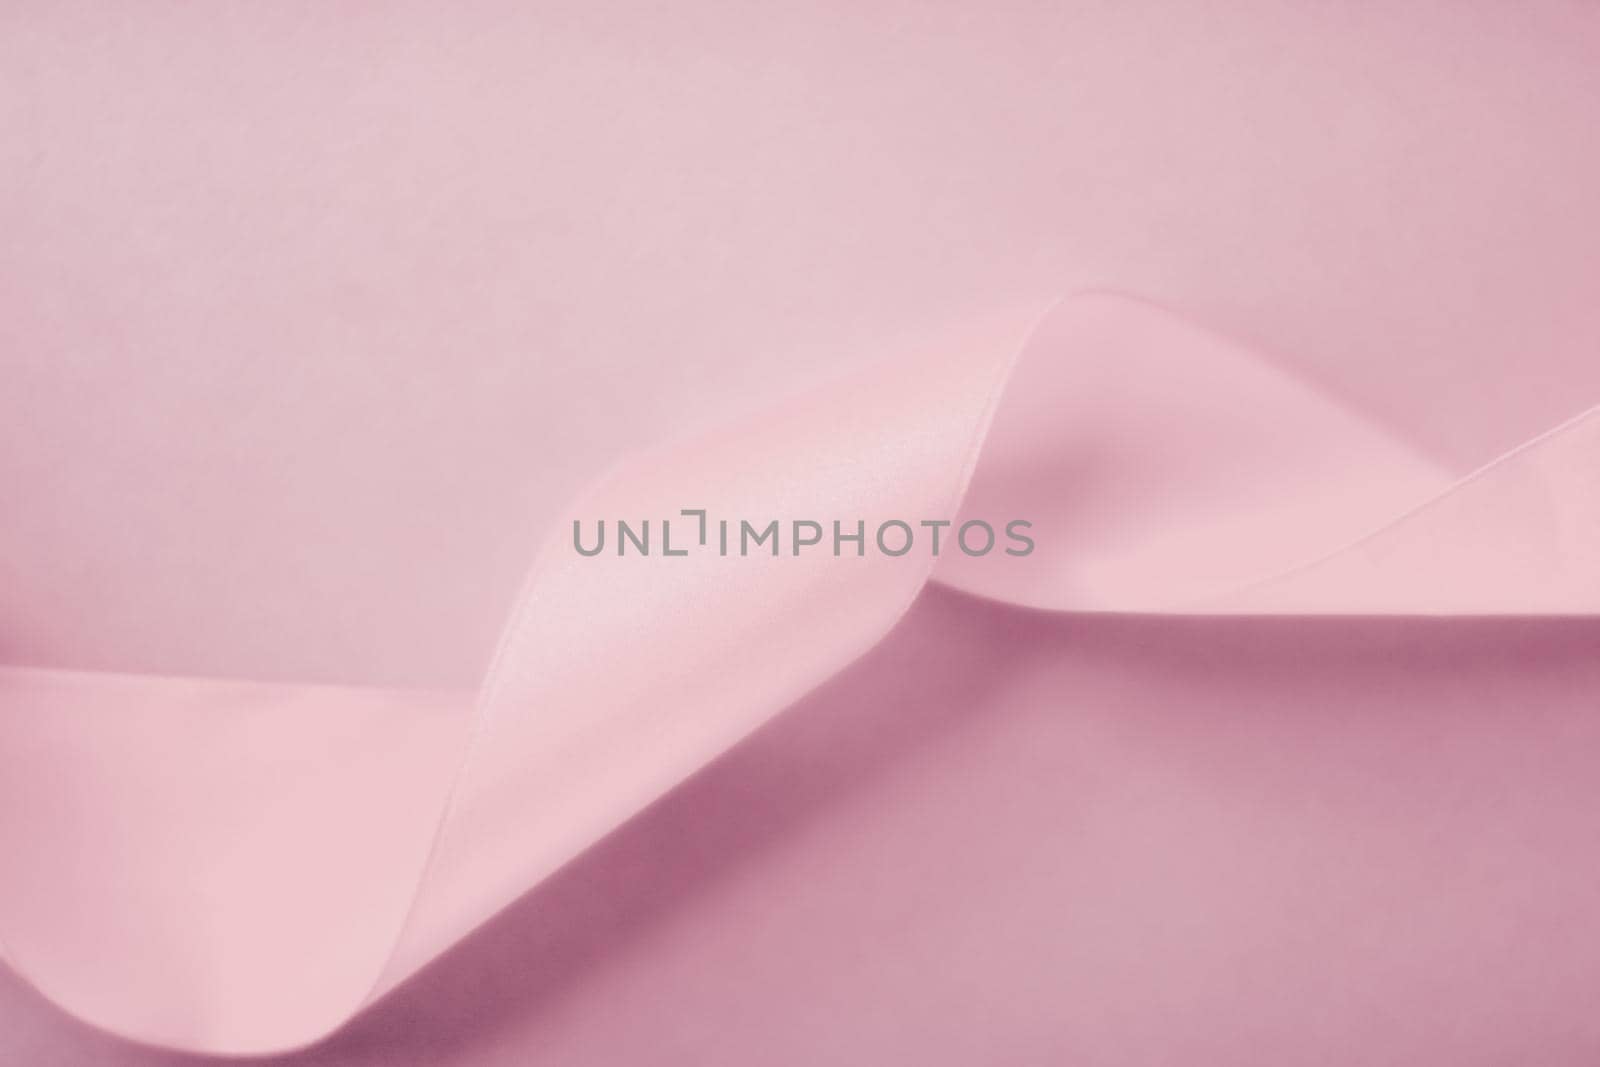 Abstract silk ribbon on blush pink background, exclusive luxury brand design for holiday sale product promotion and glamour art invitation card backdrop by Anneleven